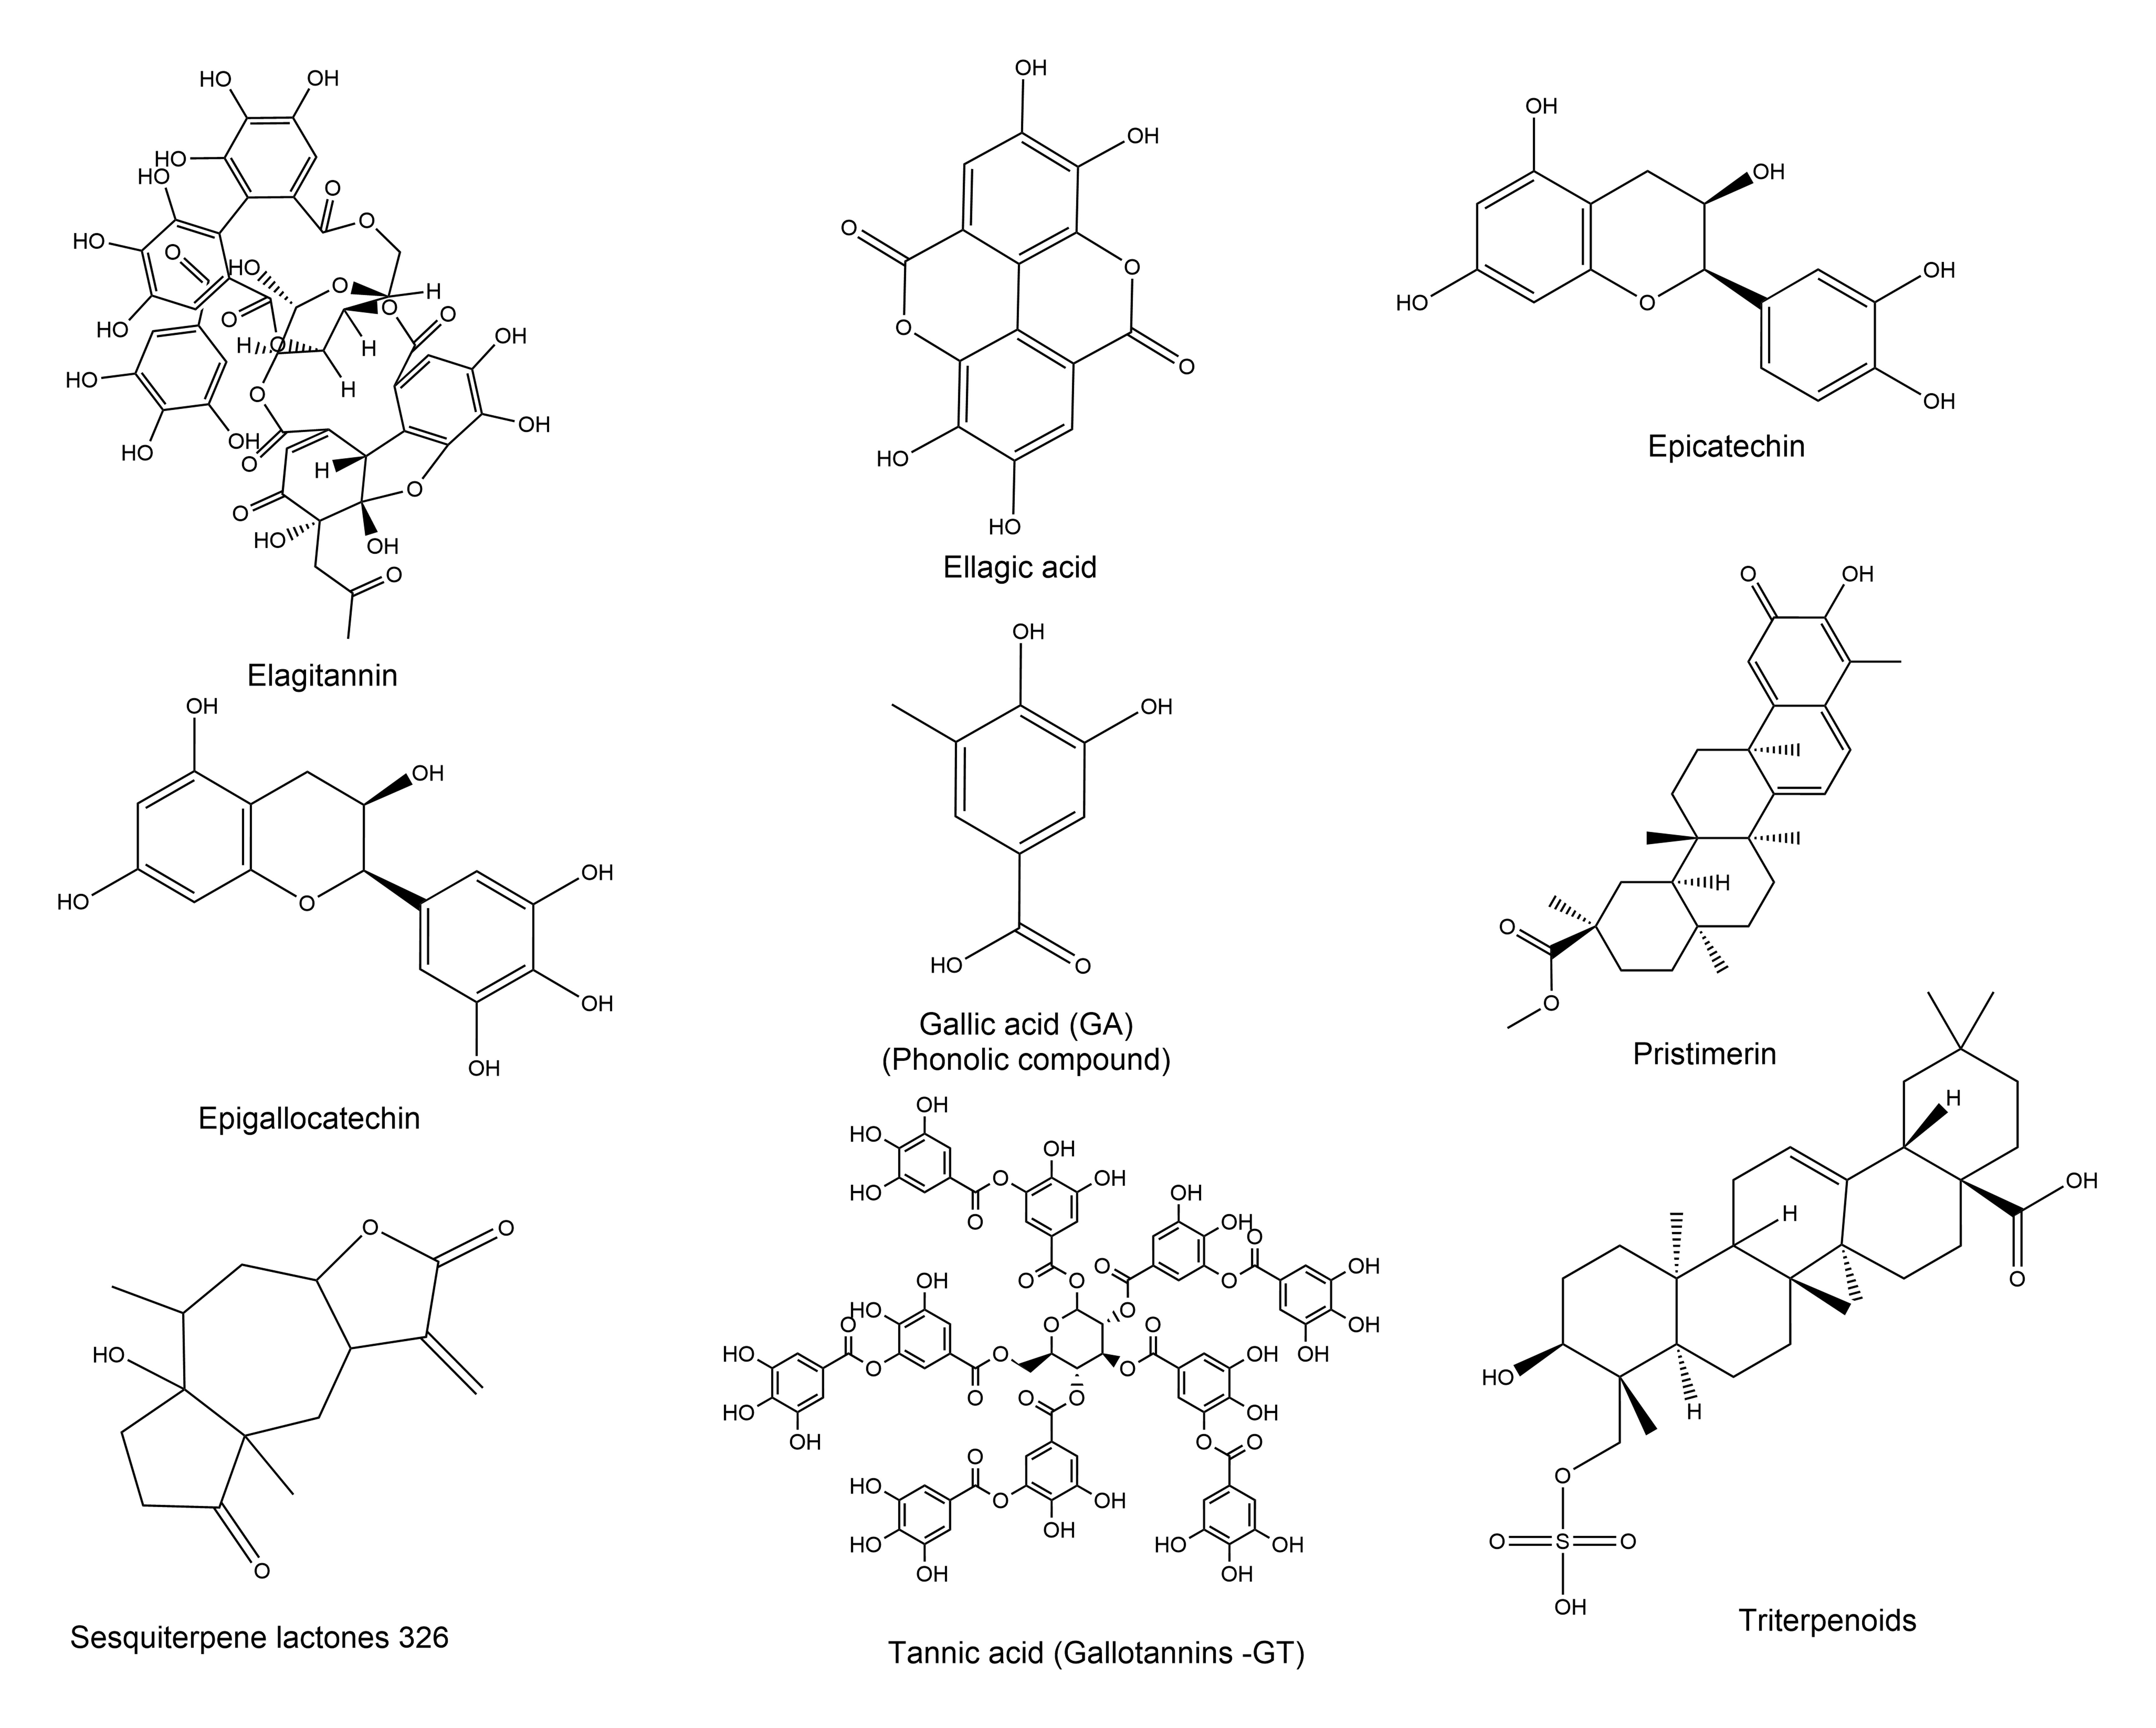 Chemical structures of some of the major compounds mentioned in .